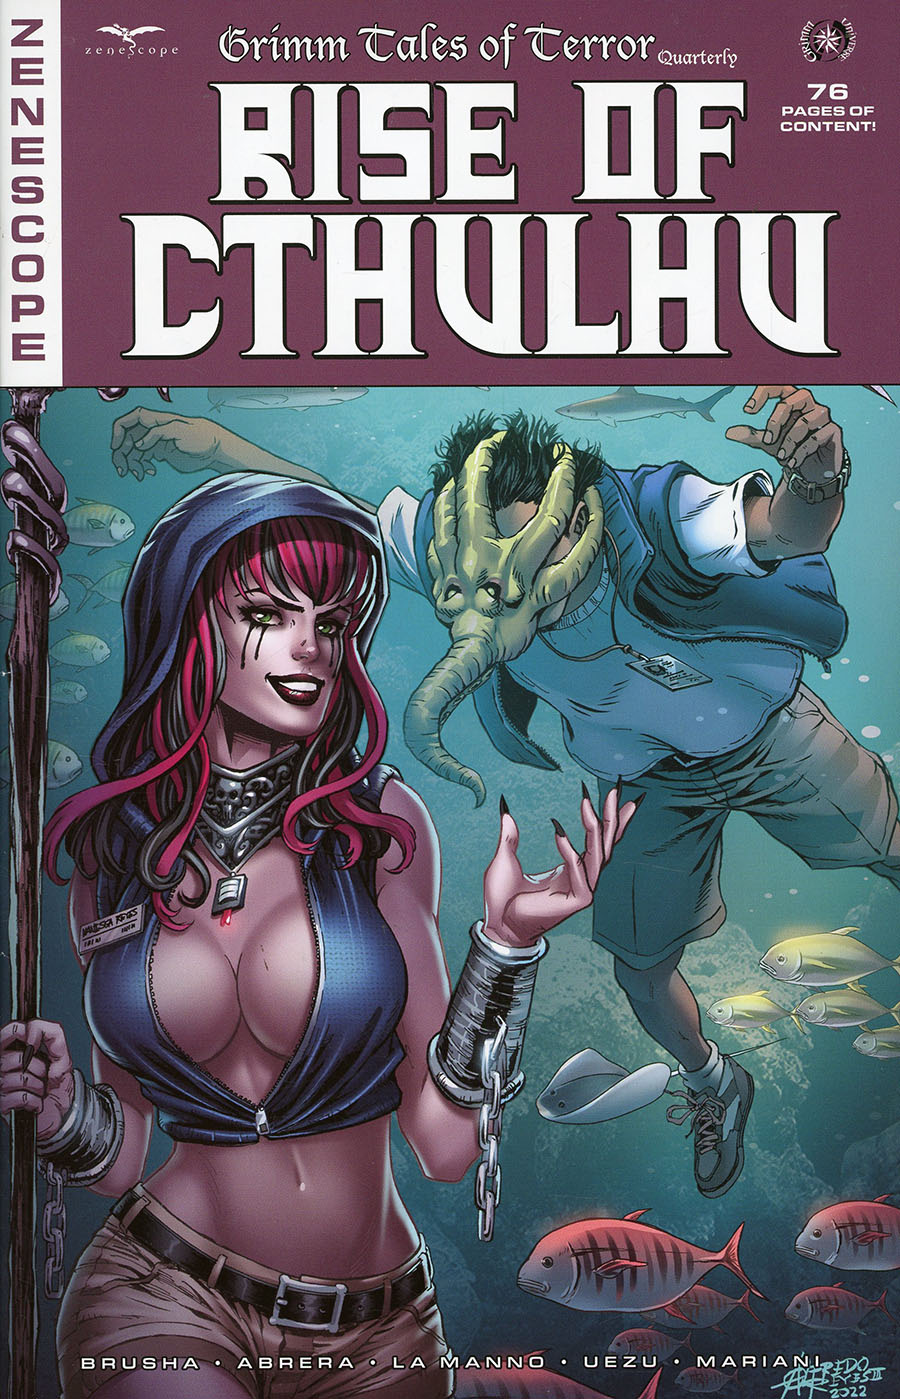 Grimm Fairy Tales Presents Grimm Tales Of Terror Quarterly #7 Rise Of Cthulhu Cover D Alfredo Reyes